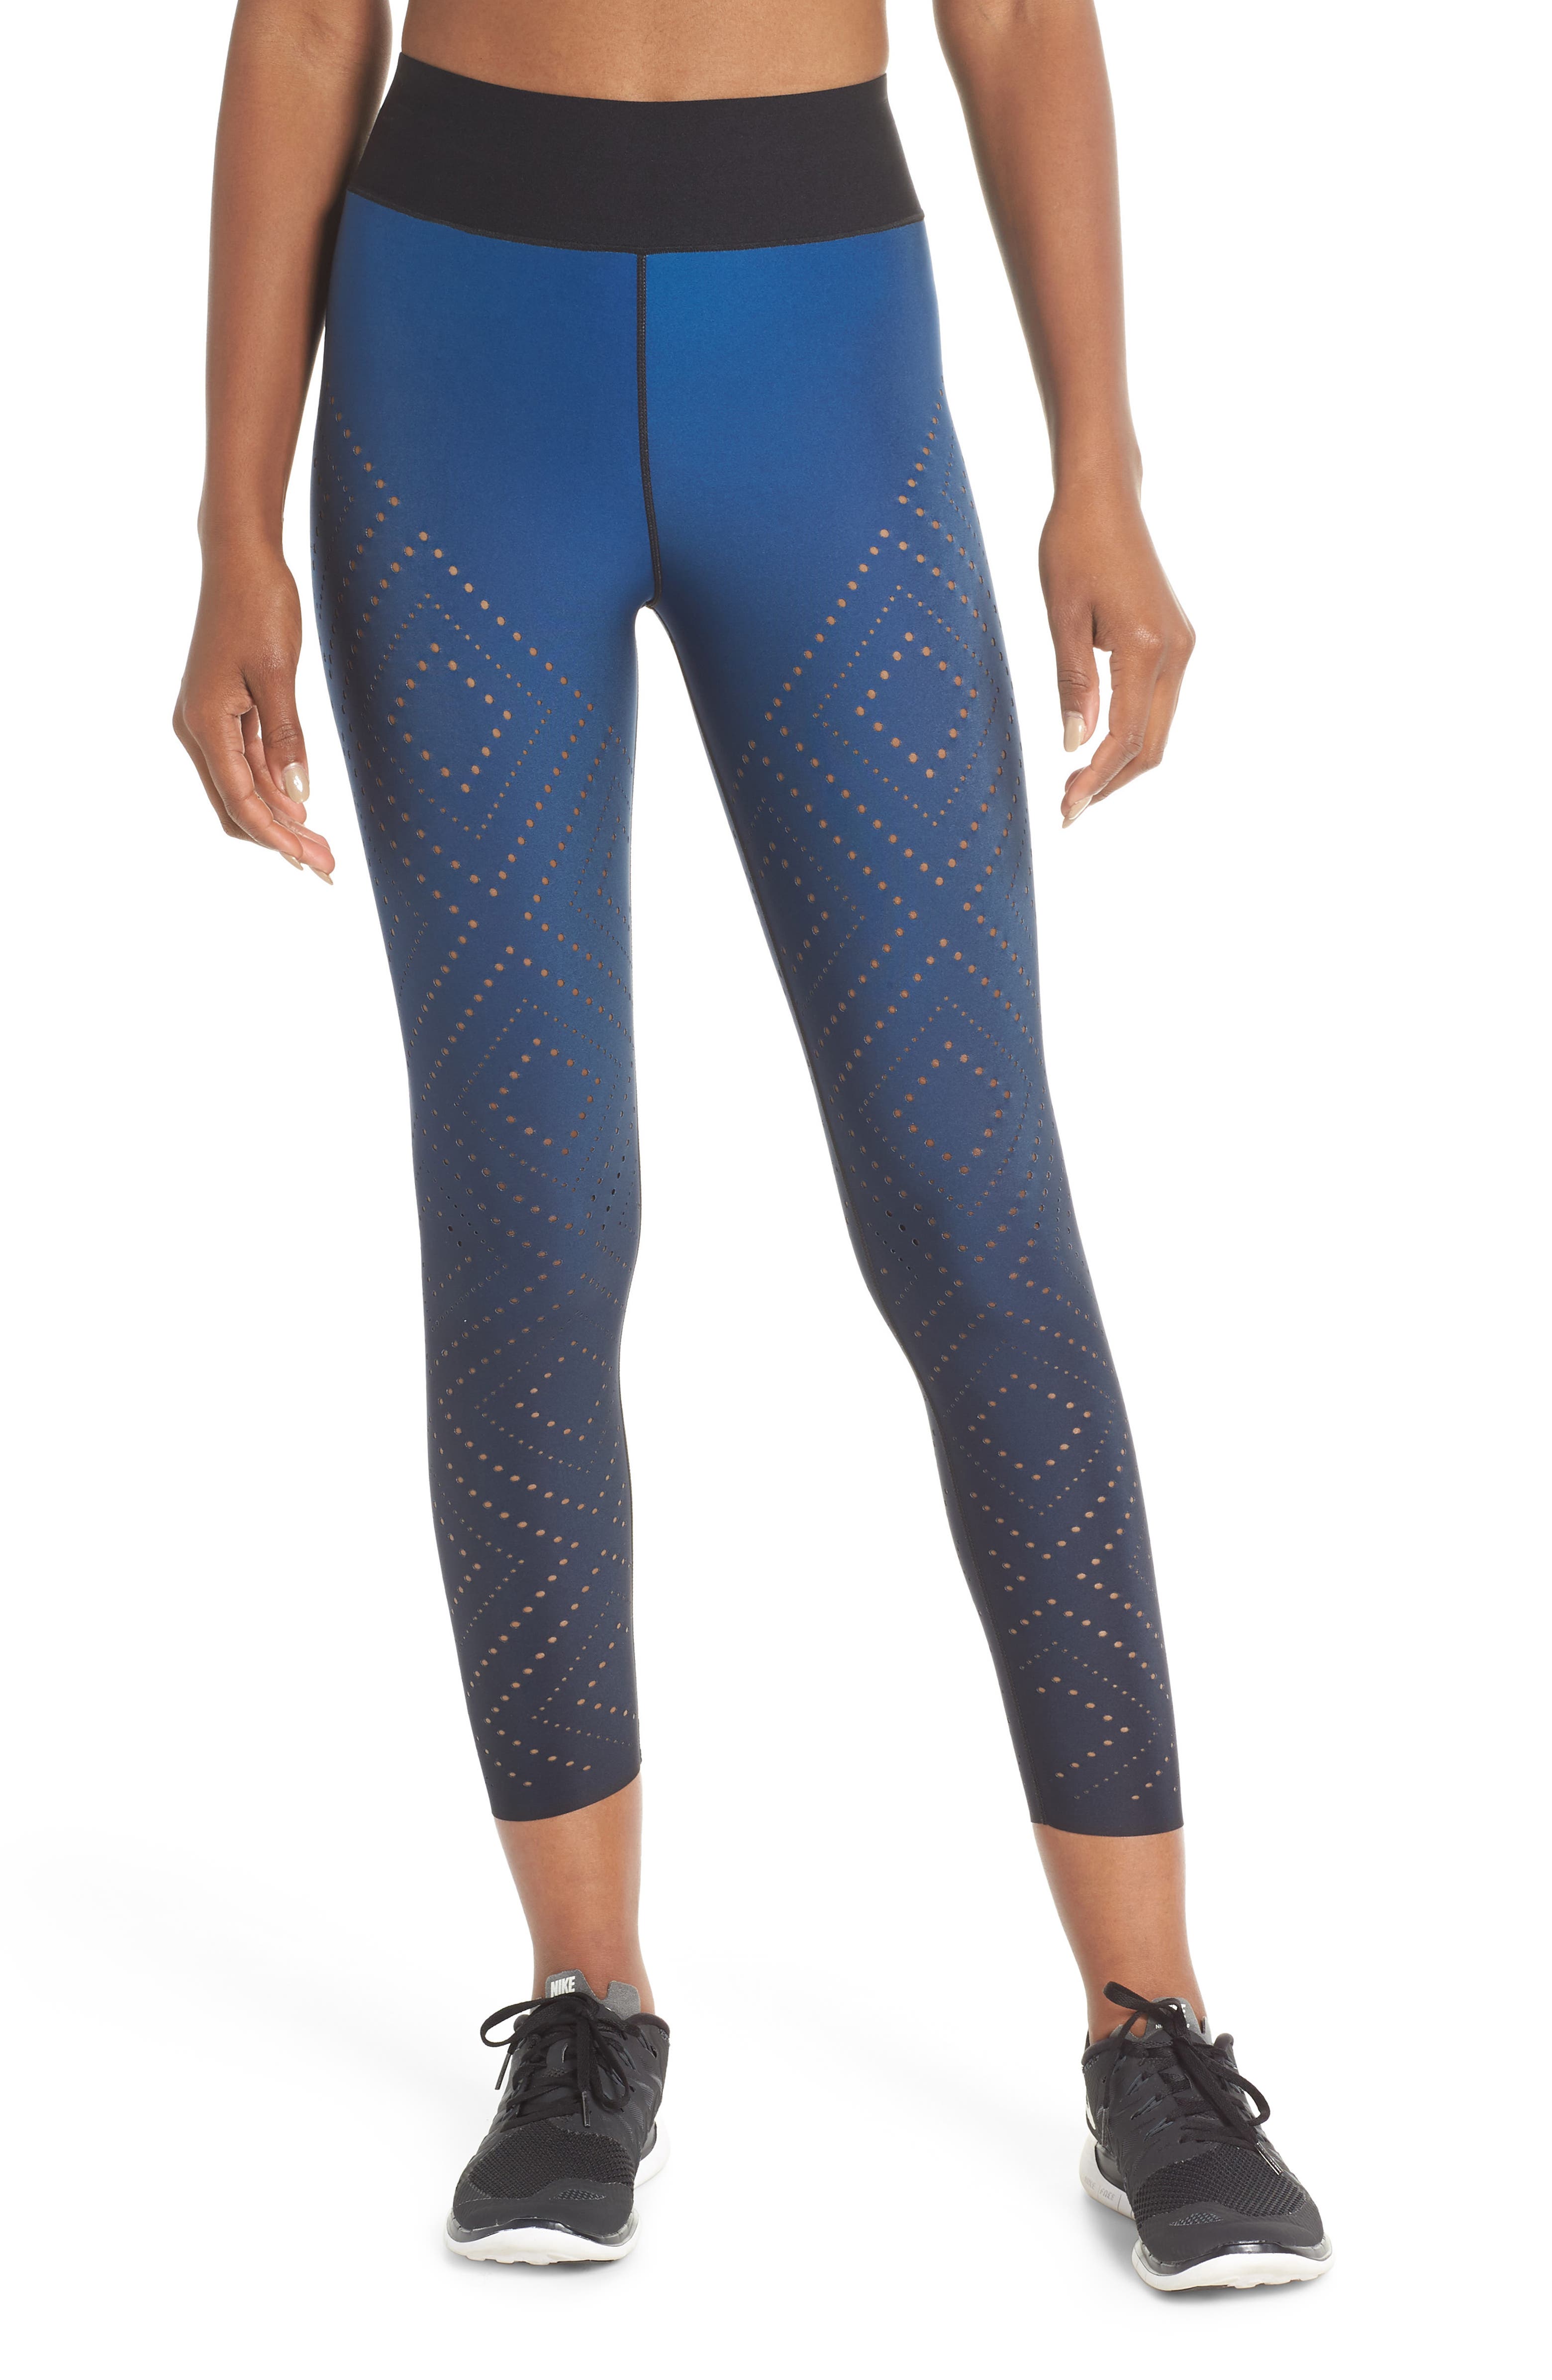 Ultracor Knockout Star Print Legging Womens Active Workout